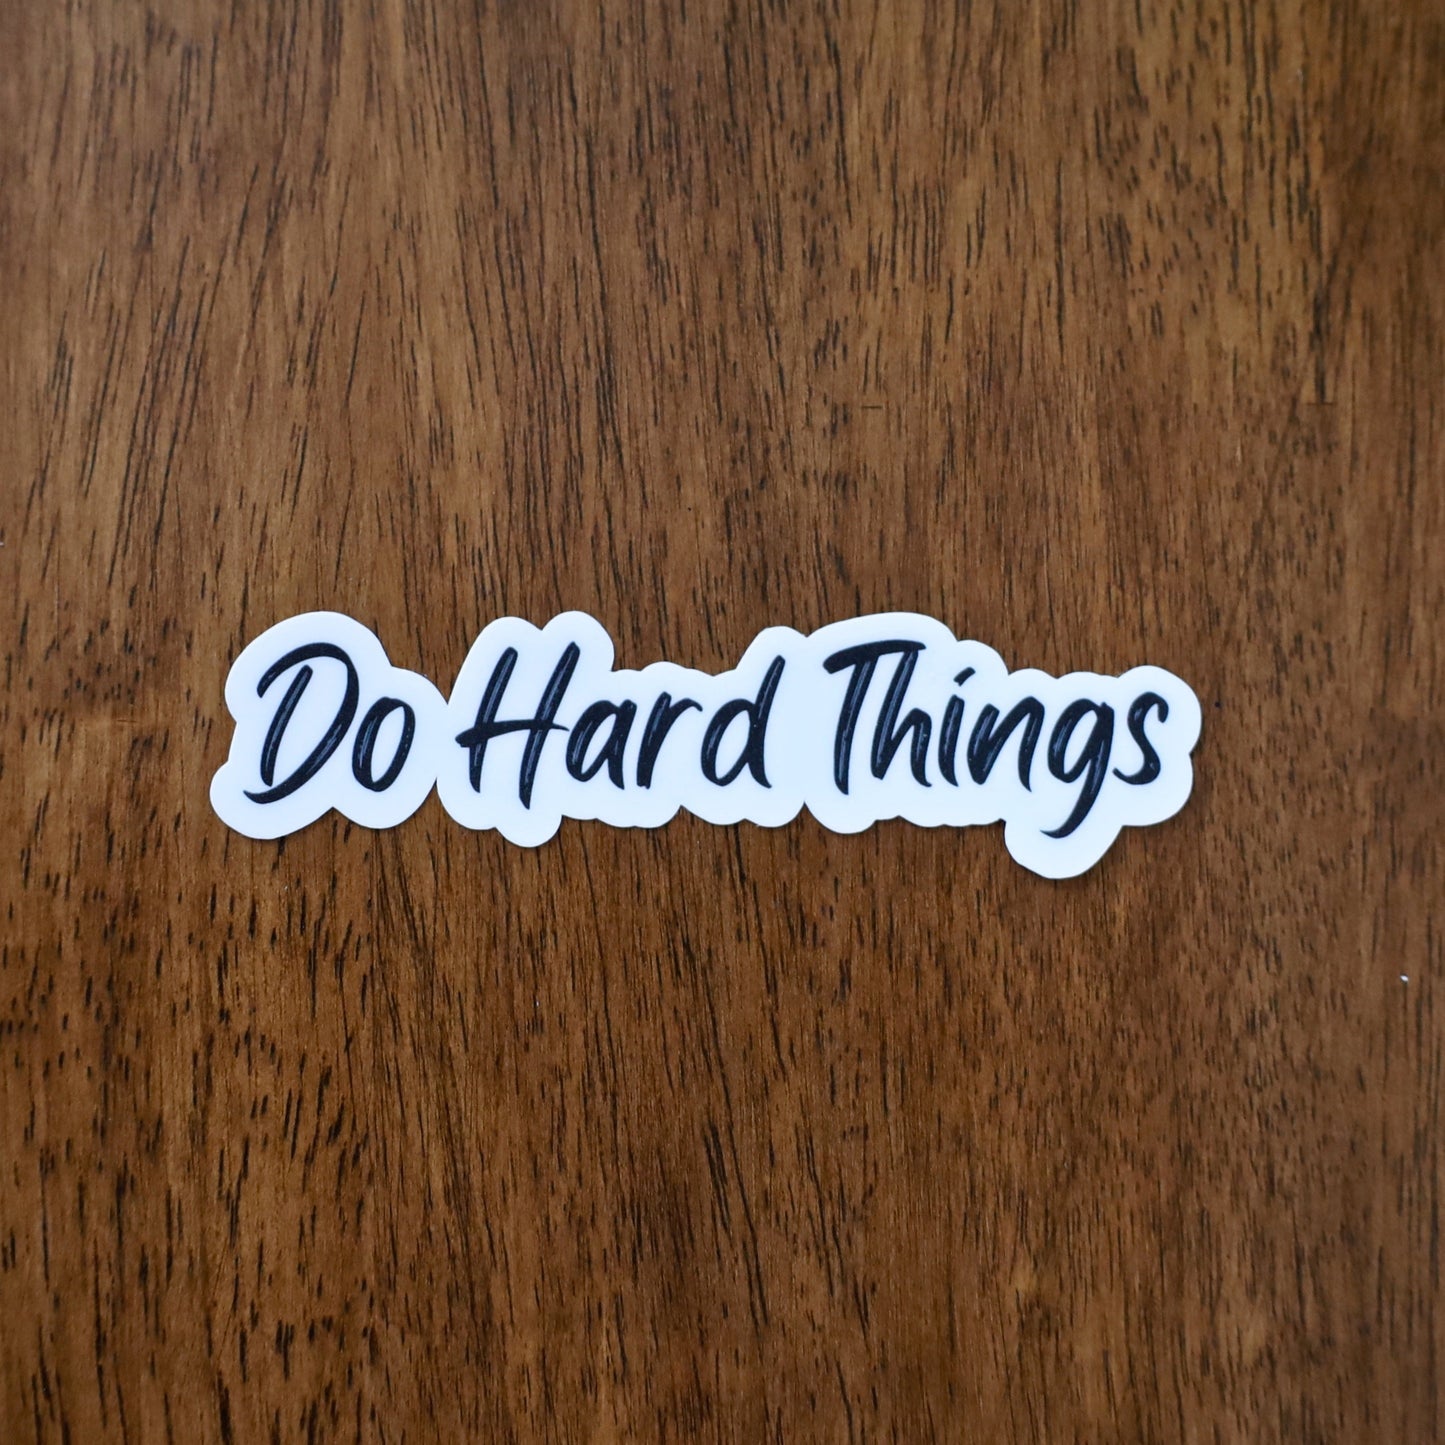 Stickers (Do Hard Things) - 3 Pack